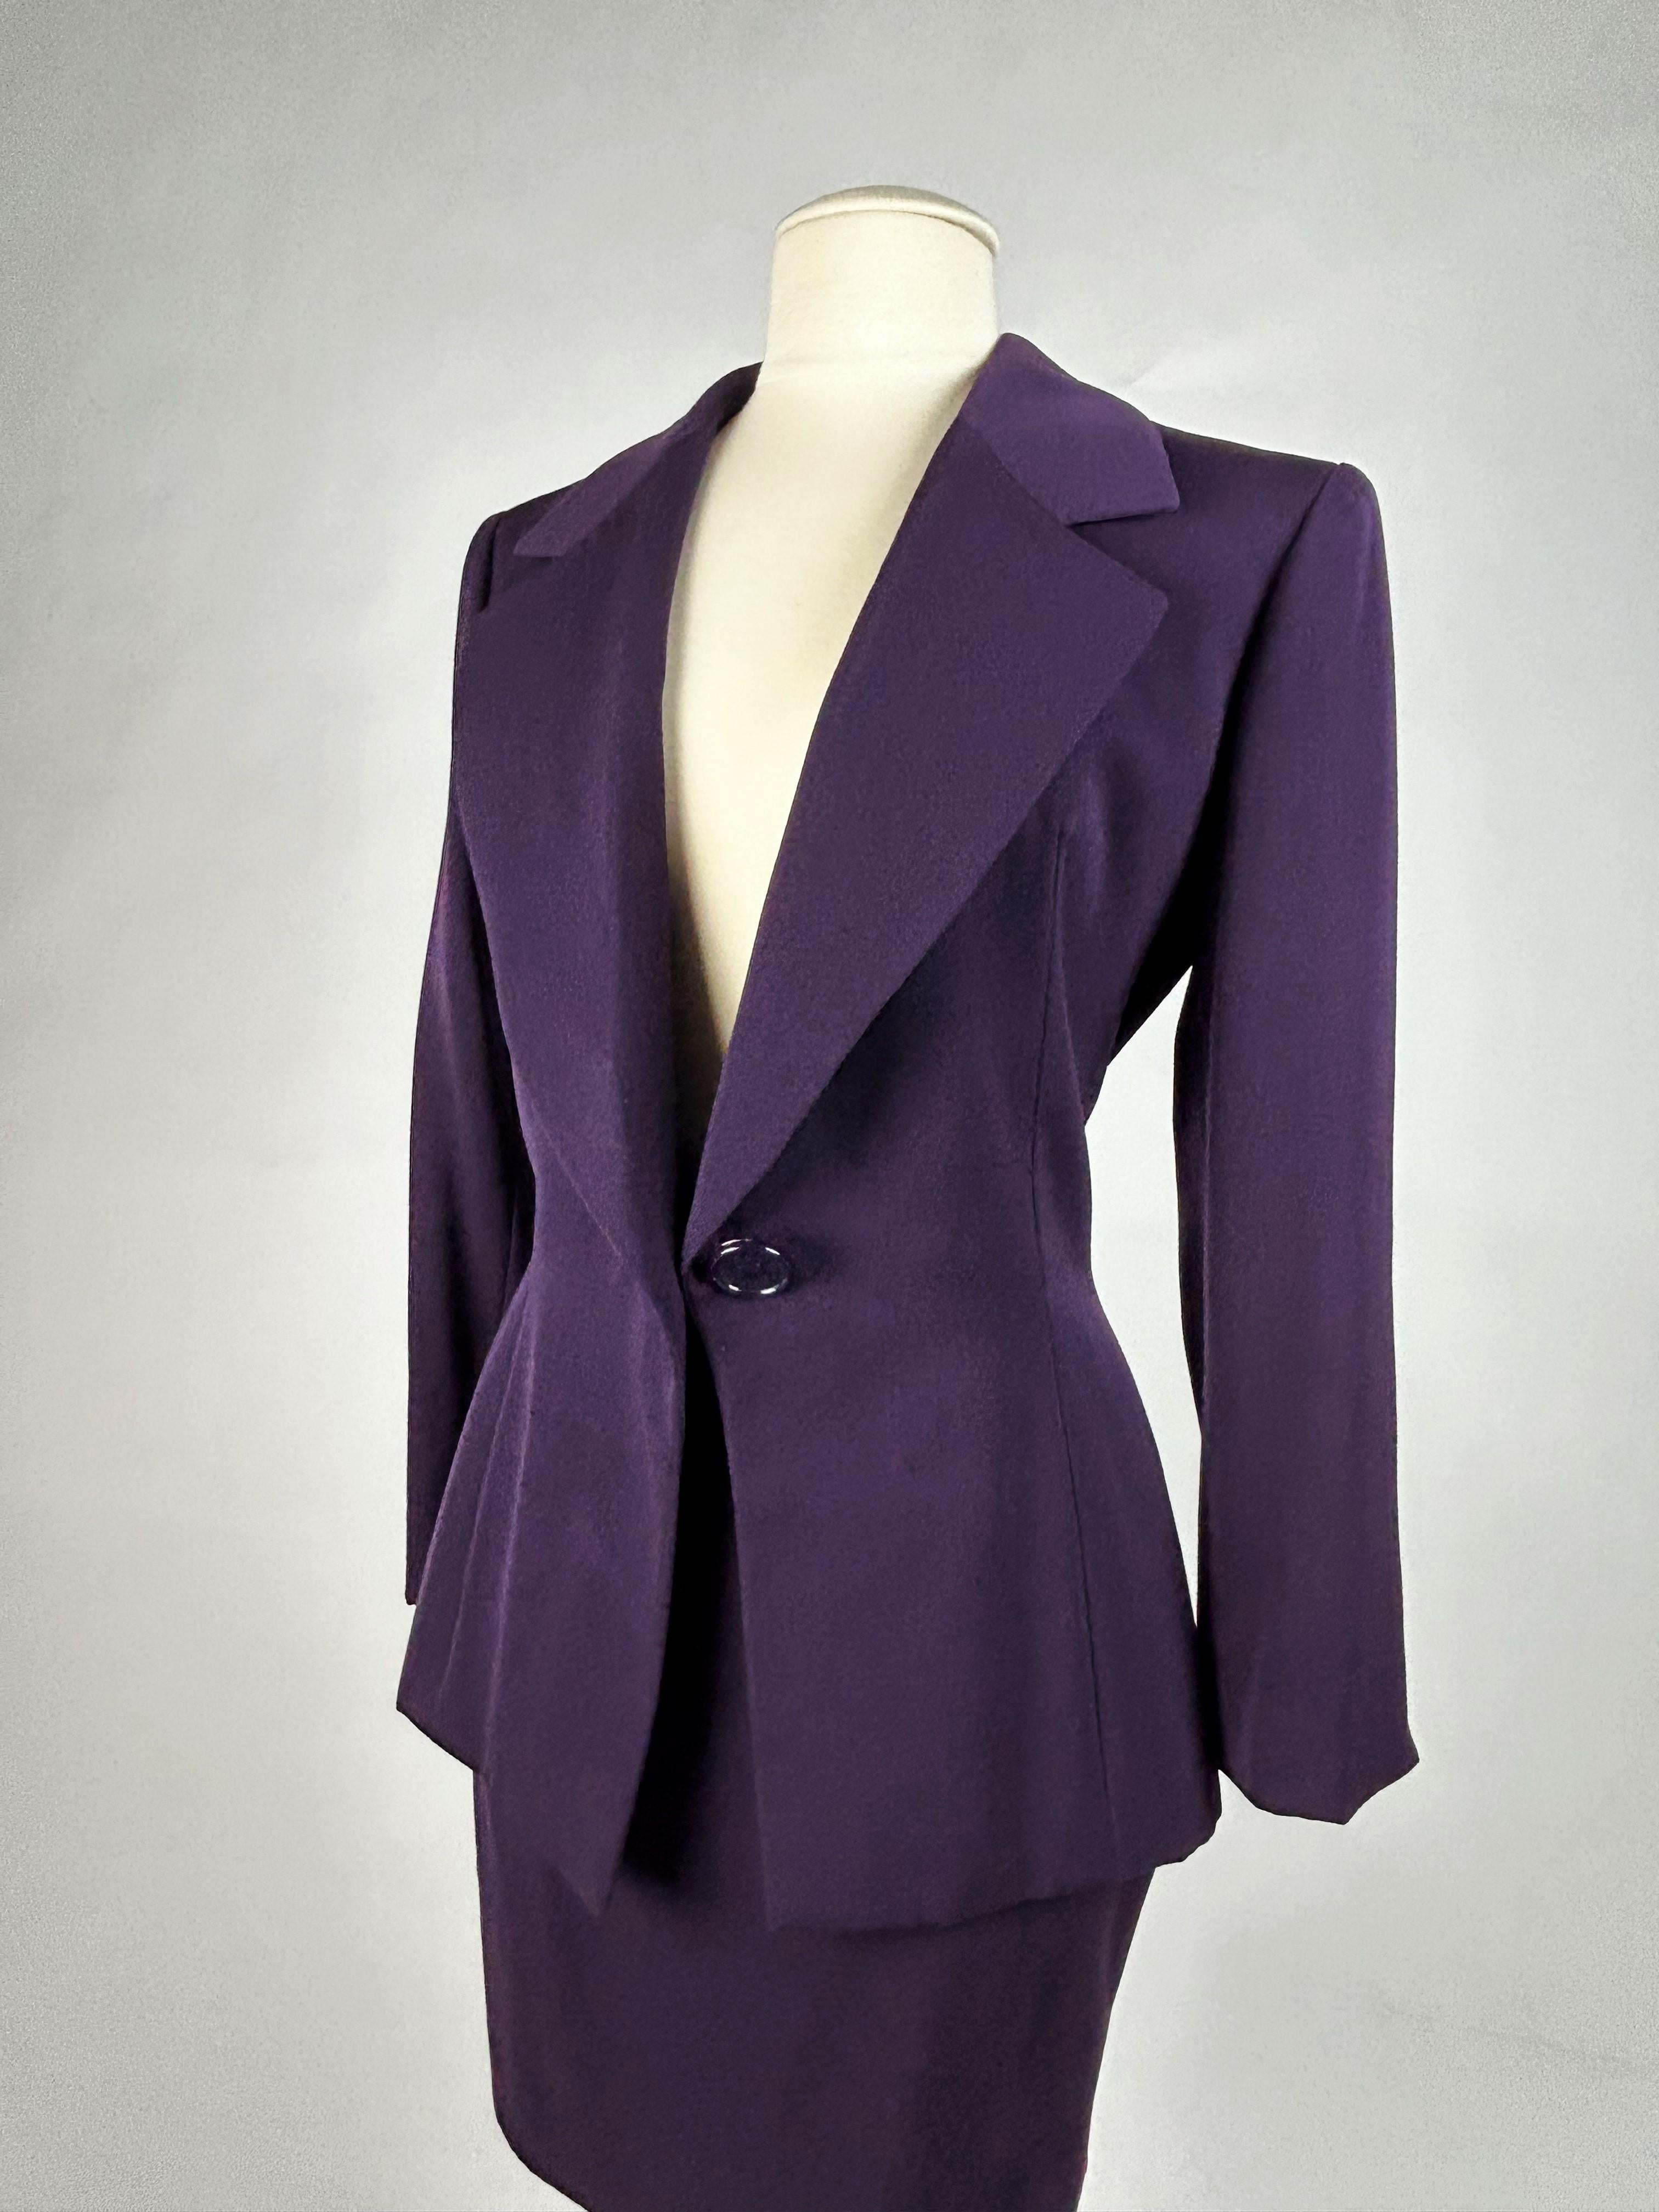 Skirt suit by Gianfranco Ferré for Christian Dior Haute Couture Circa 1995 For Sale 7